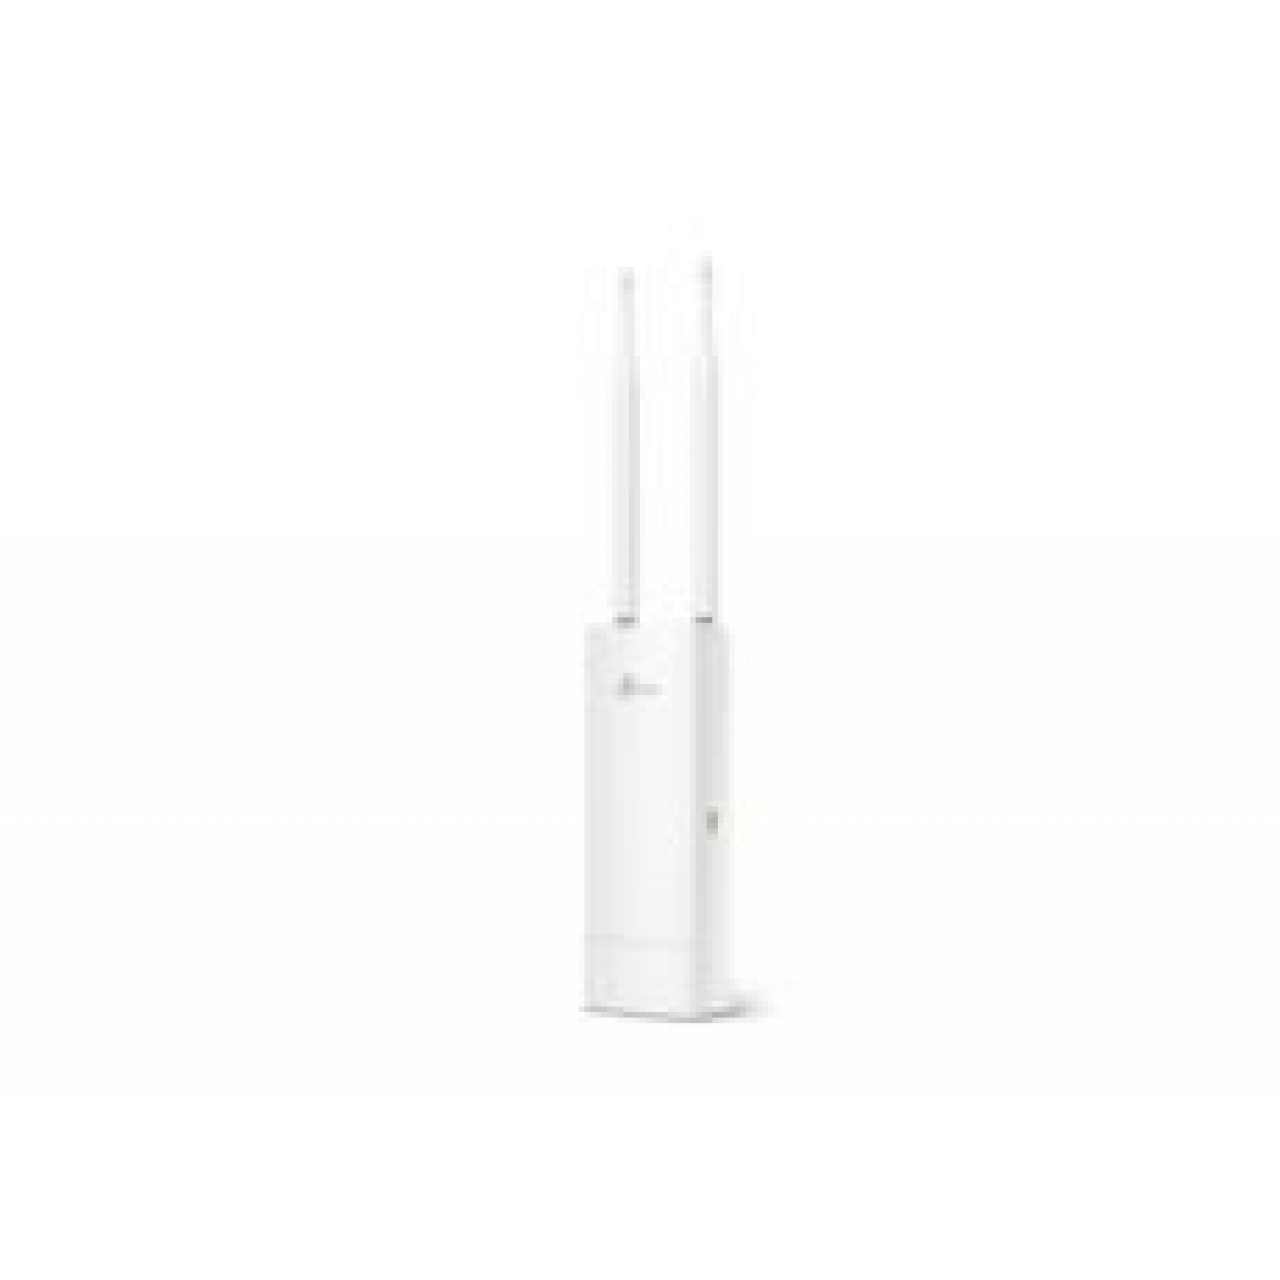 TP-LINK 300MBPS 2.4GHZ WRL OUTDOOR ACCESS POINT